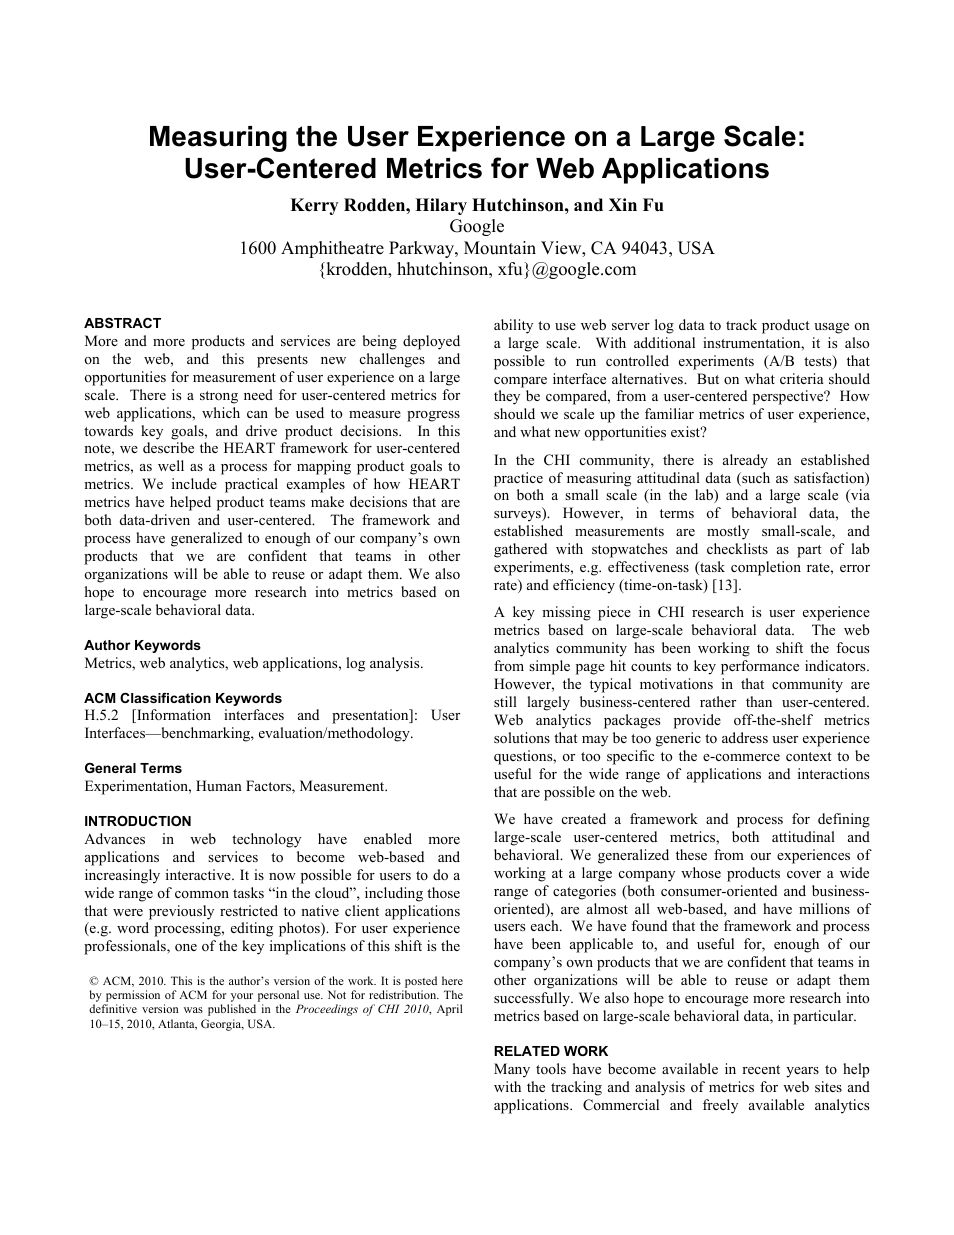 Measuring the User Experience on a Large Scale: User-Centered Metrics for Web Applications